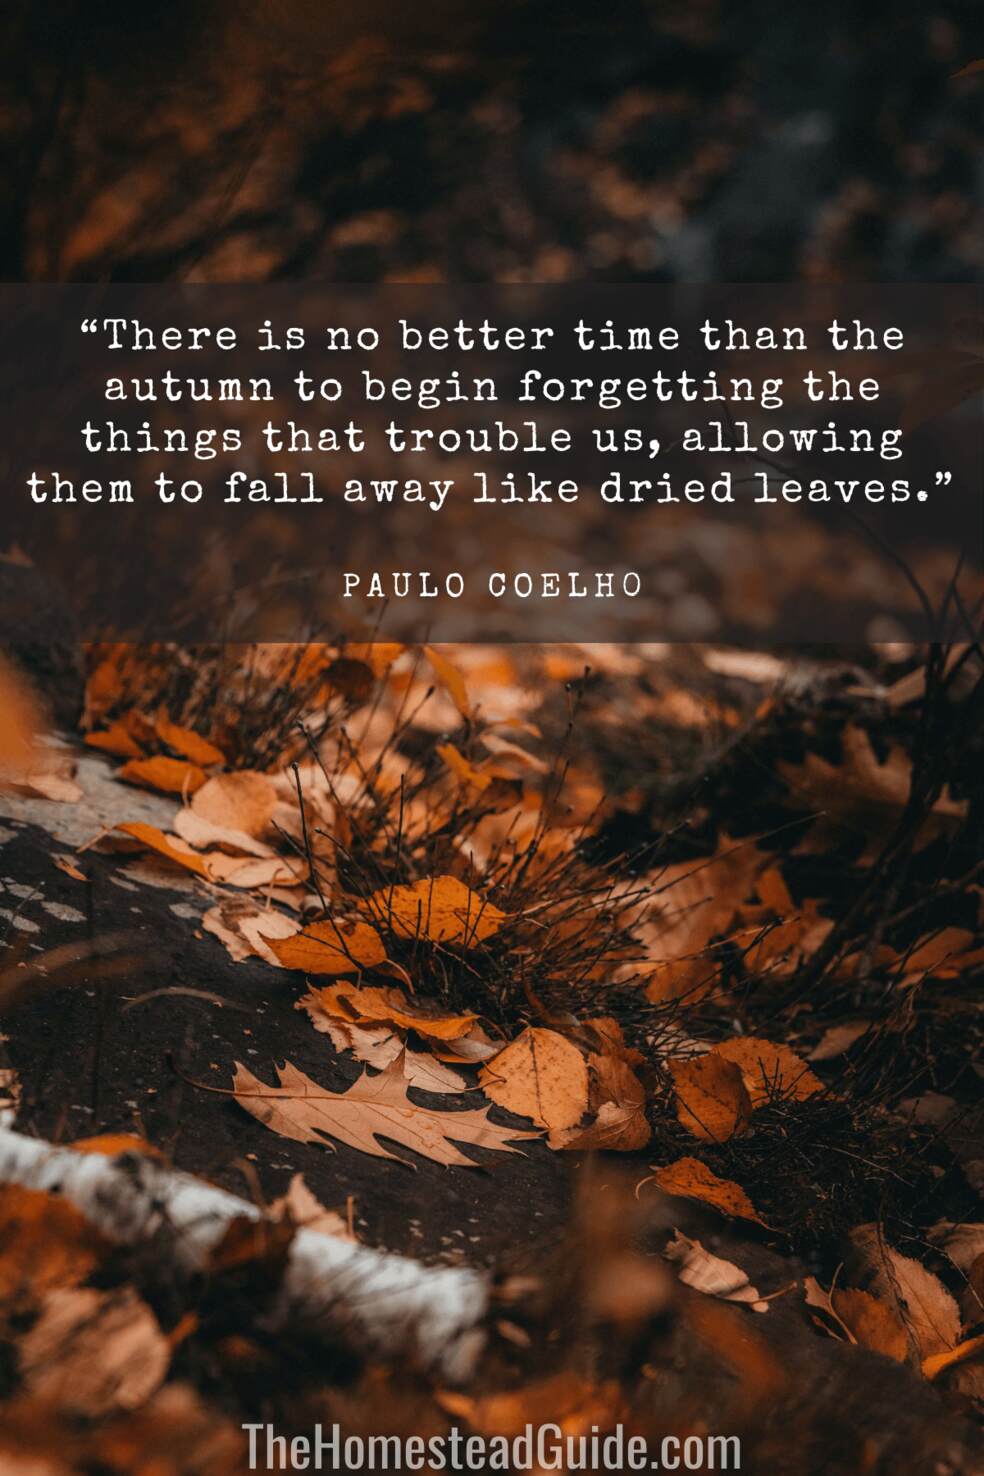 There is no better time than the autumn to begin forgetting the things that trouble us, allowing them to fall away like dried leaves.